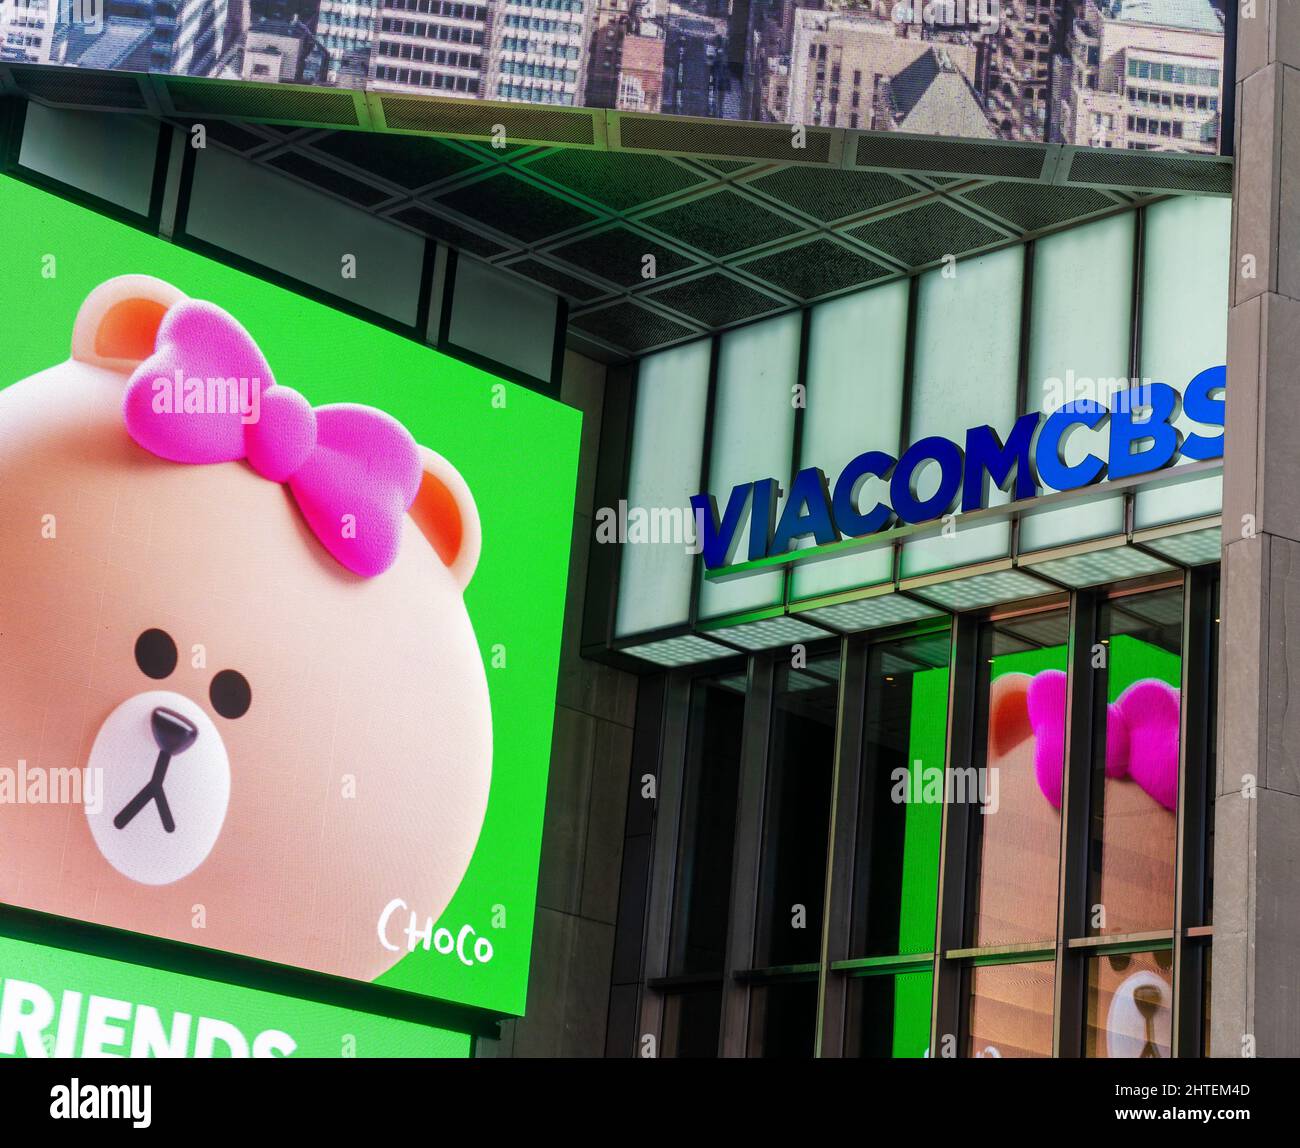 The ViacomCBS headquarters in Times Square in New York on Wednesday, February 16, 2022. ViacomCBS has changed its name to Paramount Global.  (© Richard B. Levine) Stock Photo